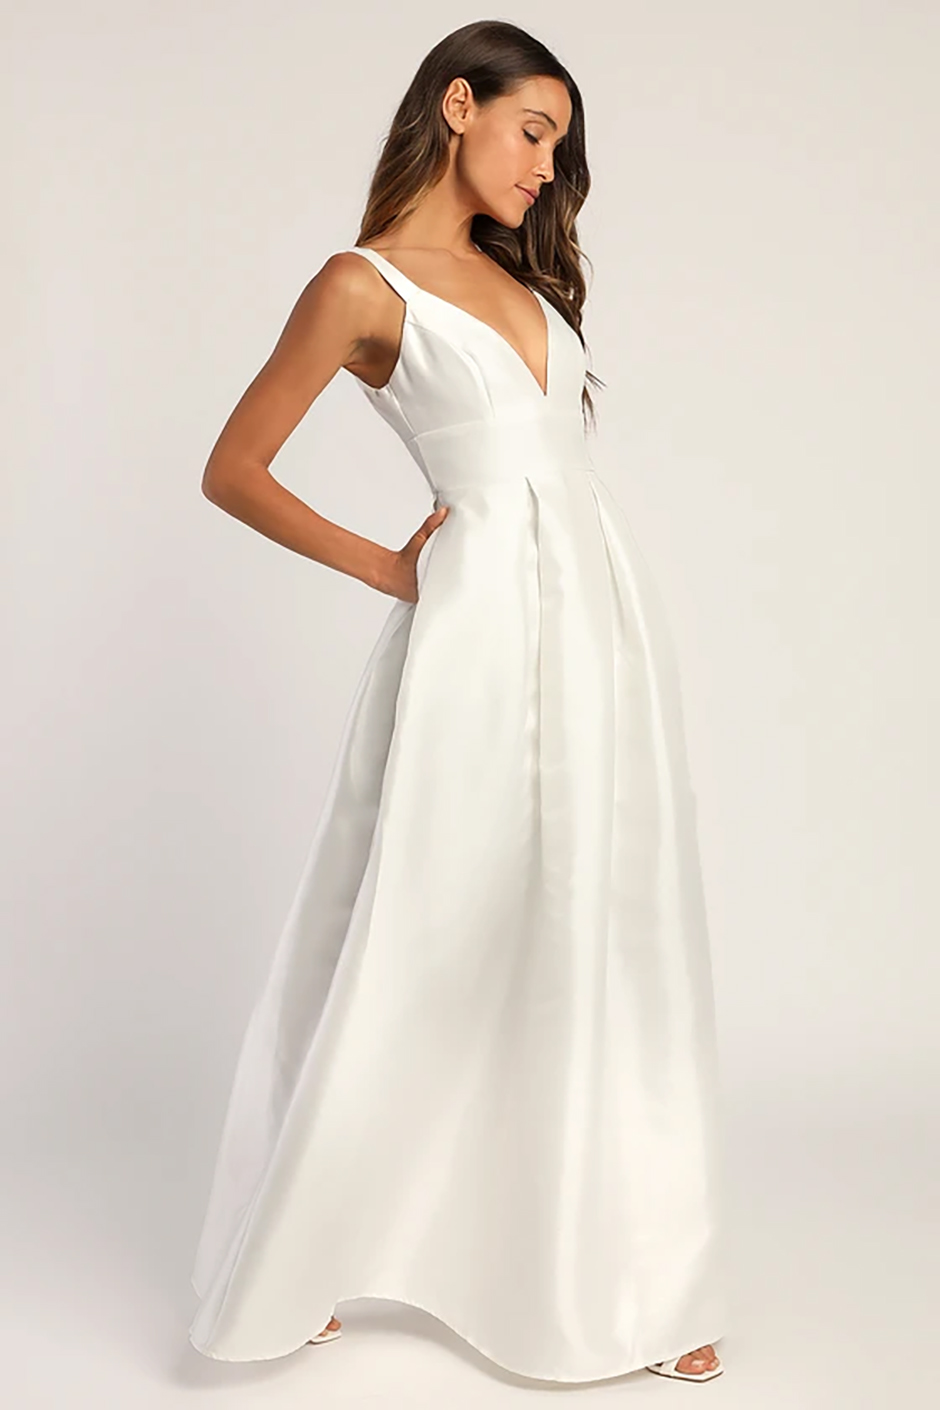 Sleeveless maxi wedding dress with pockets in ivory with plunging neckline and open back